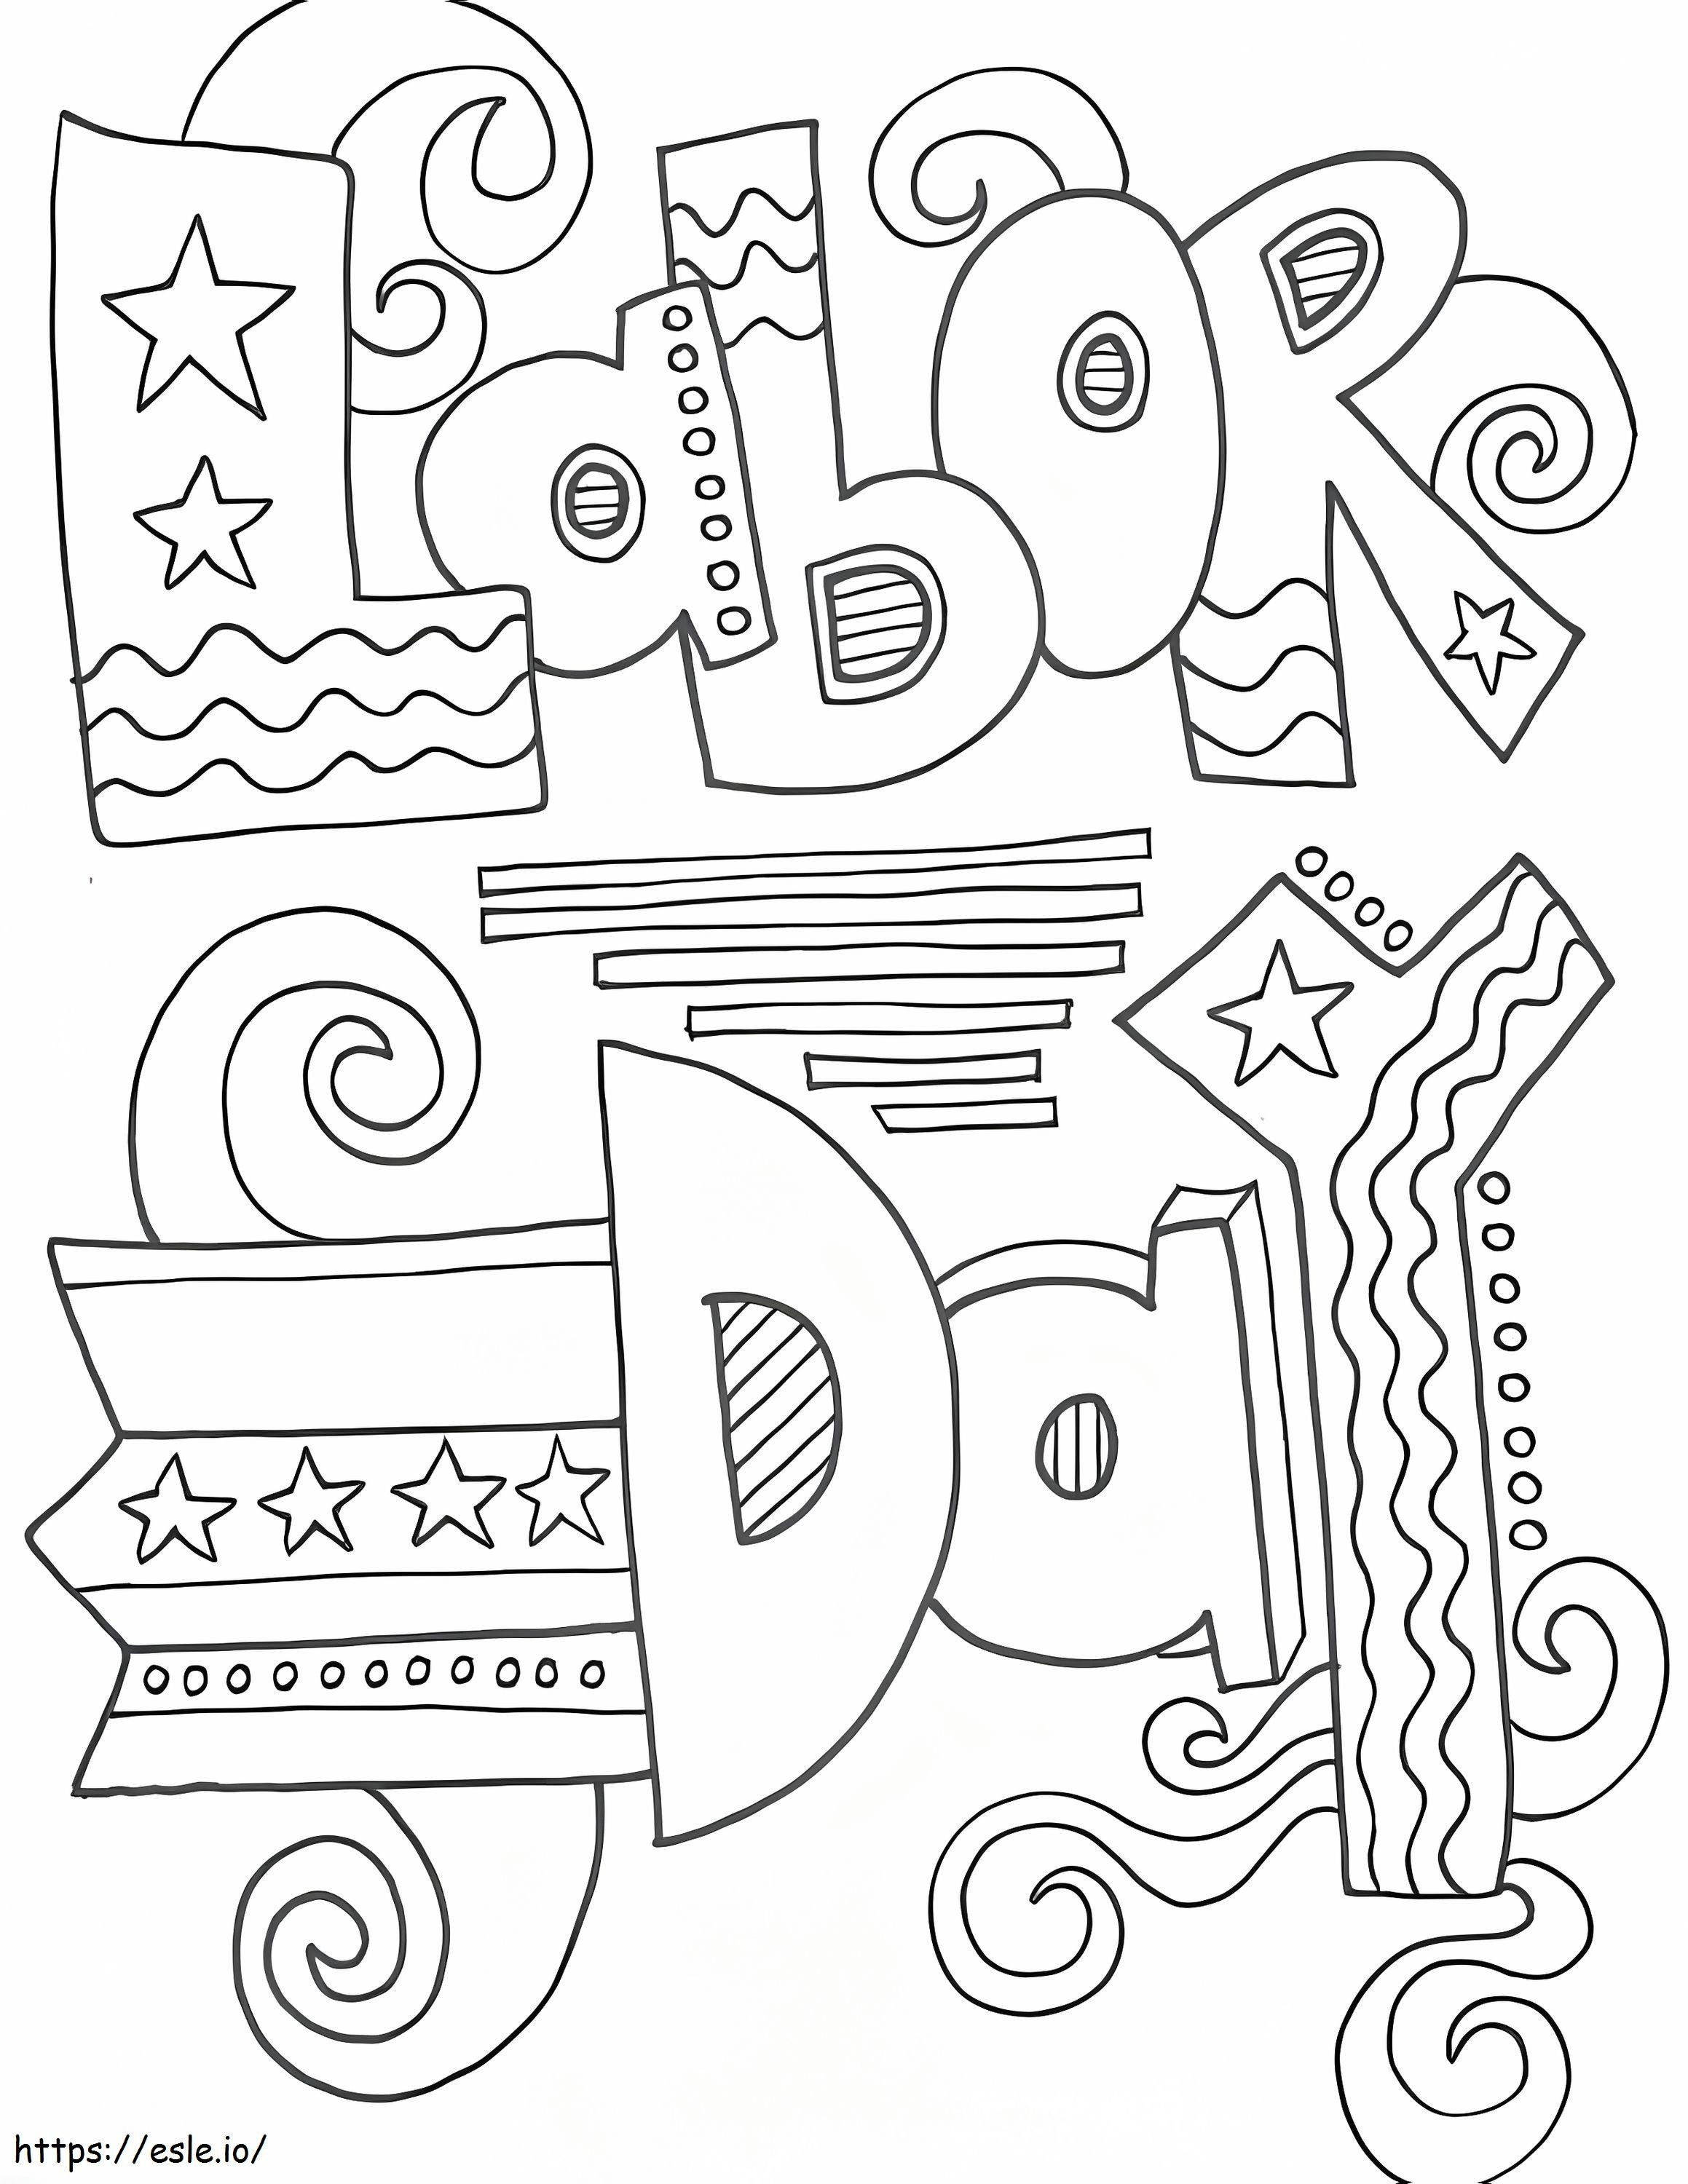 Labor Day 11 coloring page